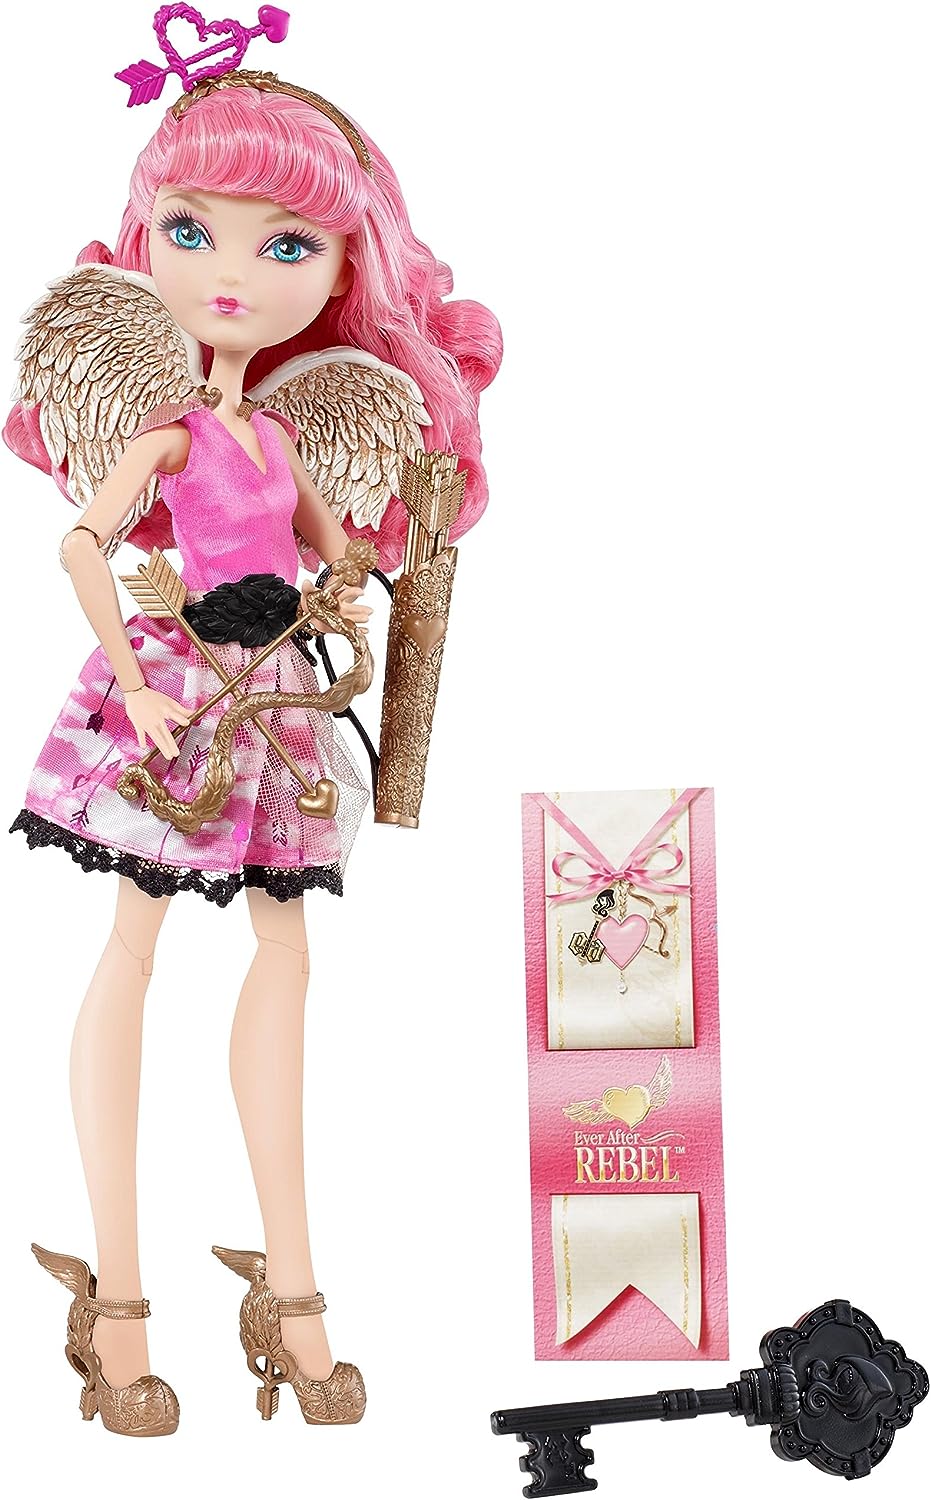 How To Use Ever After High Dolls To Promote Kids’ Critical Thinking Skills插图